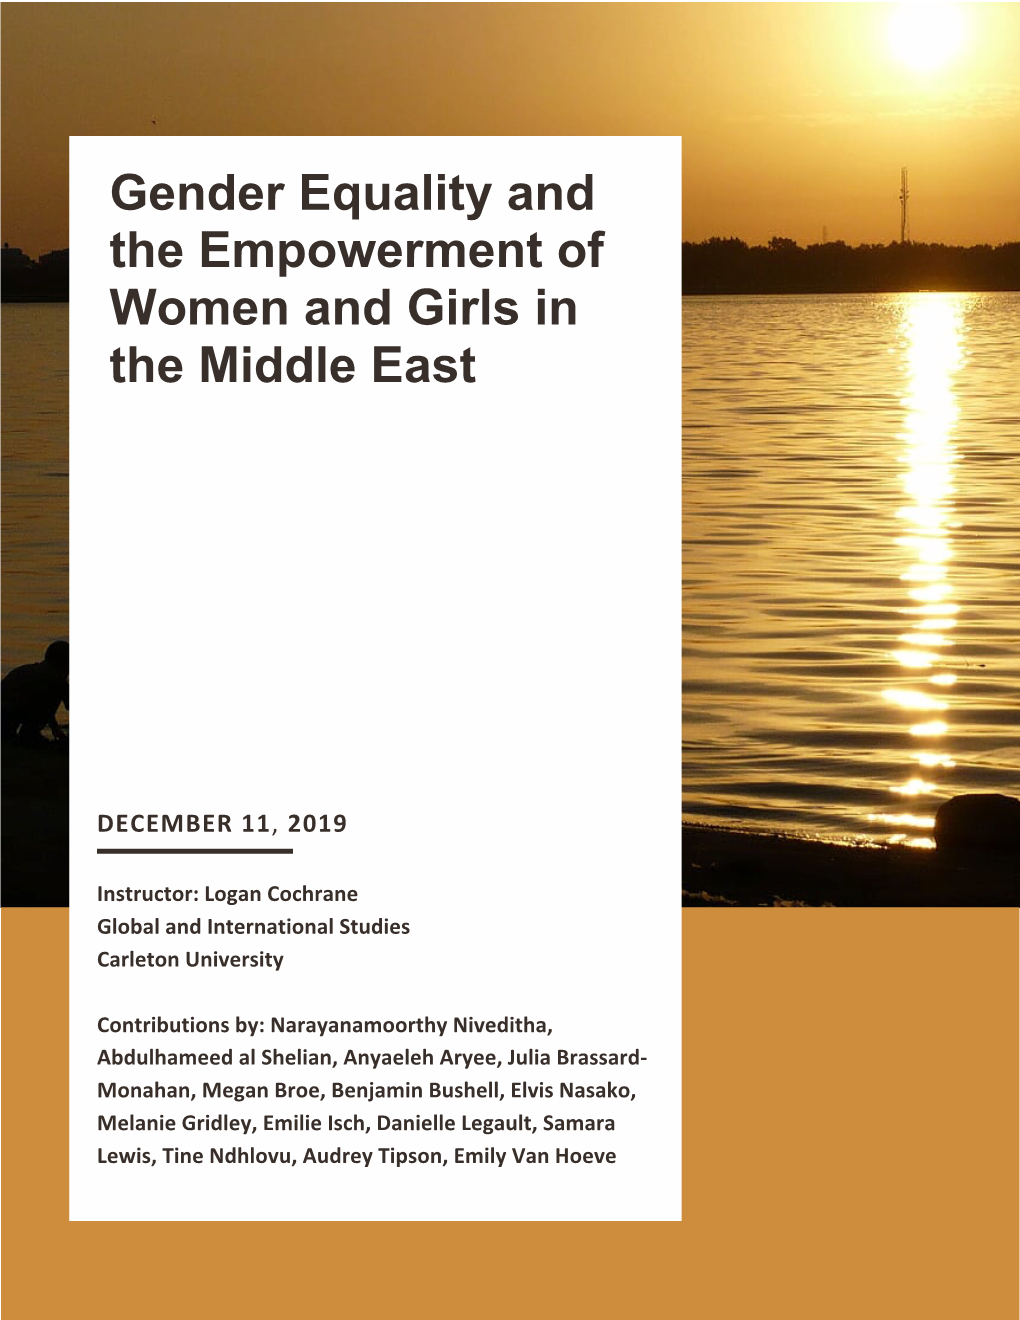 Gender Equality and the Empowerment of Women and Girls in the Middle East